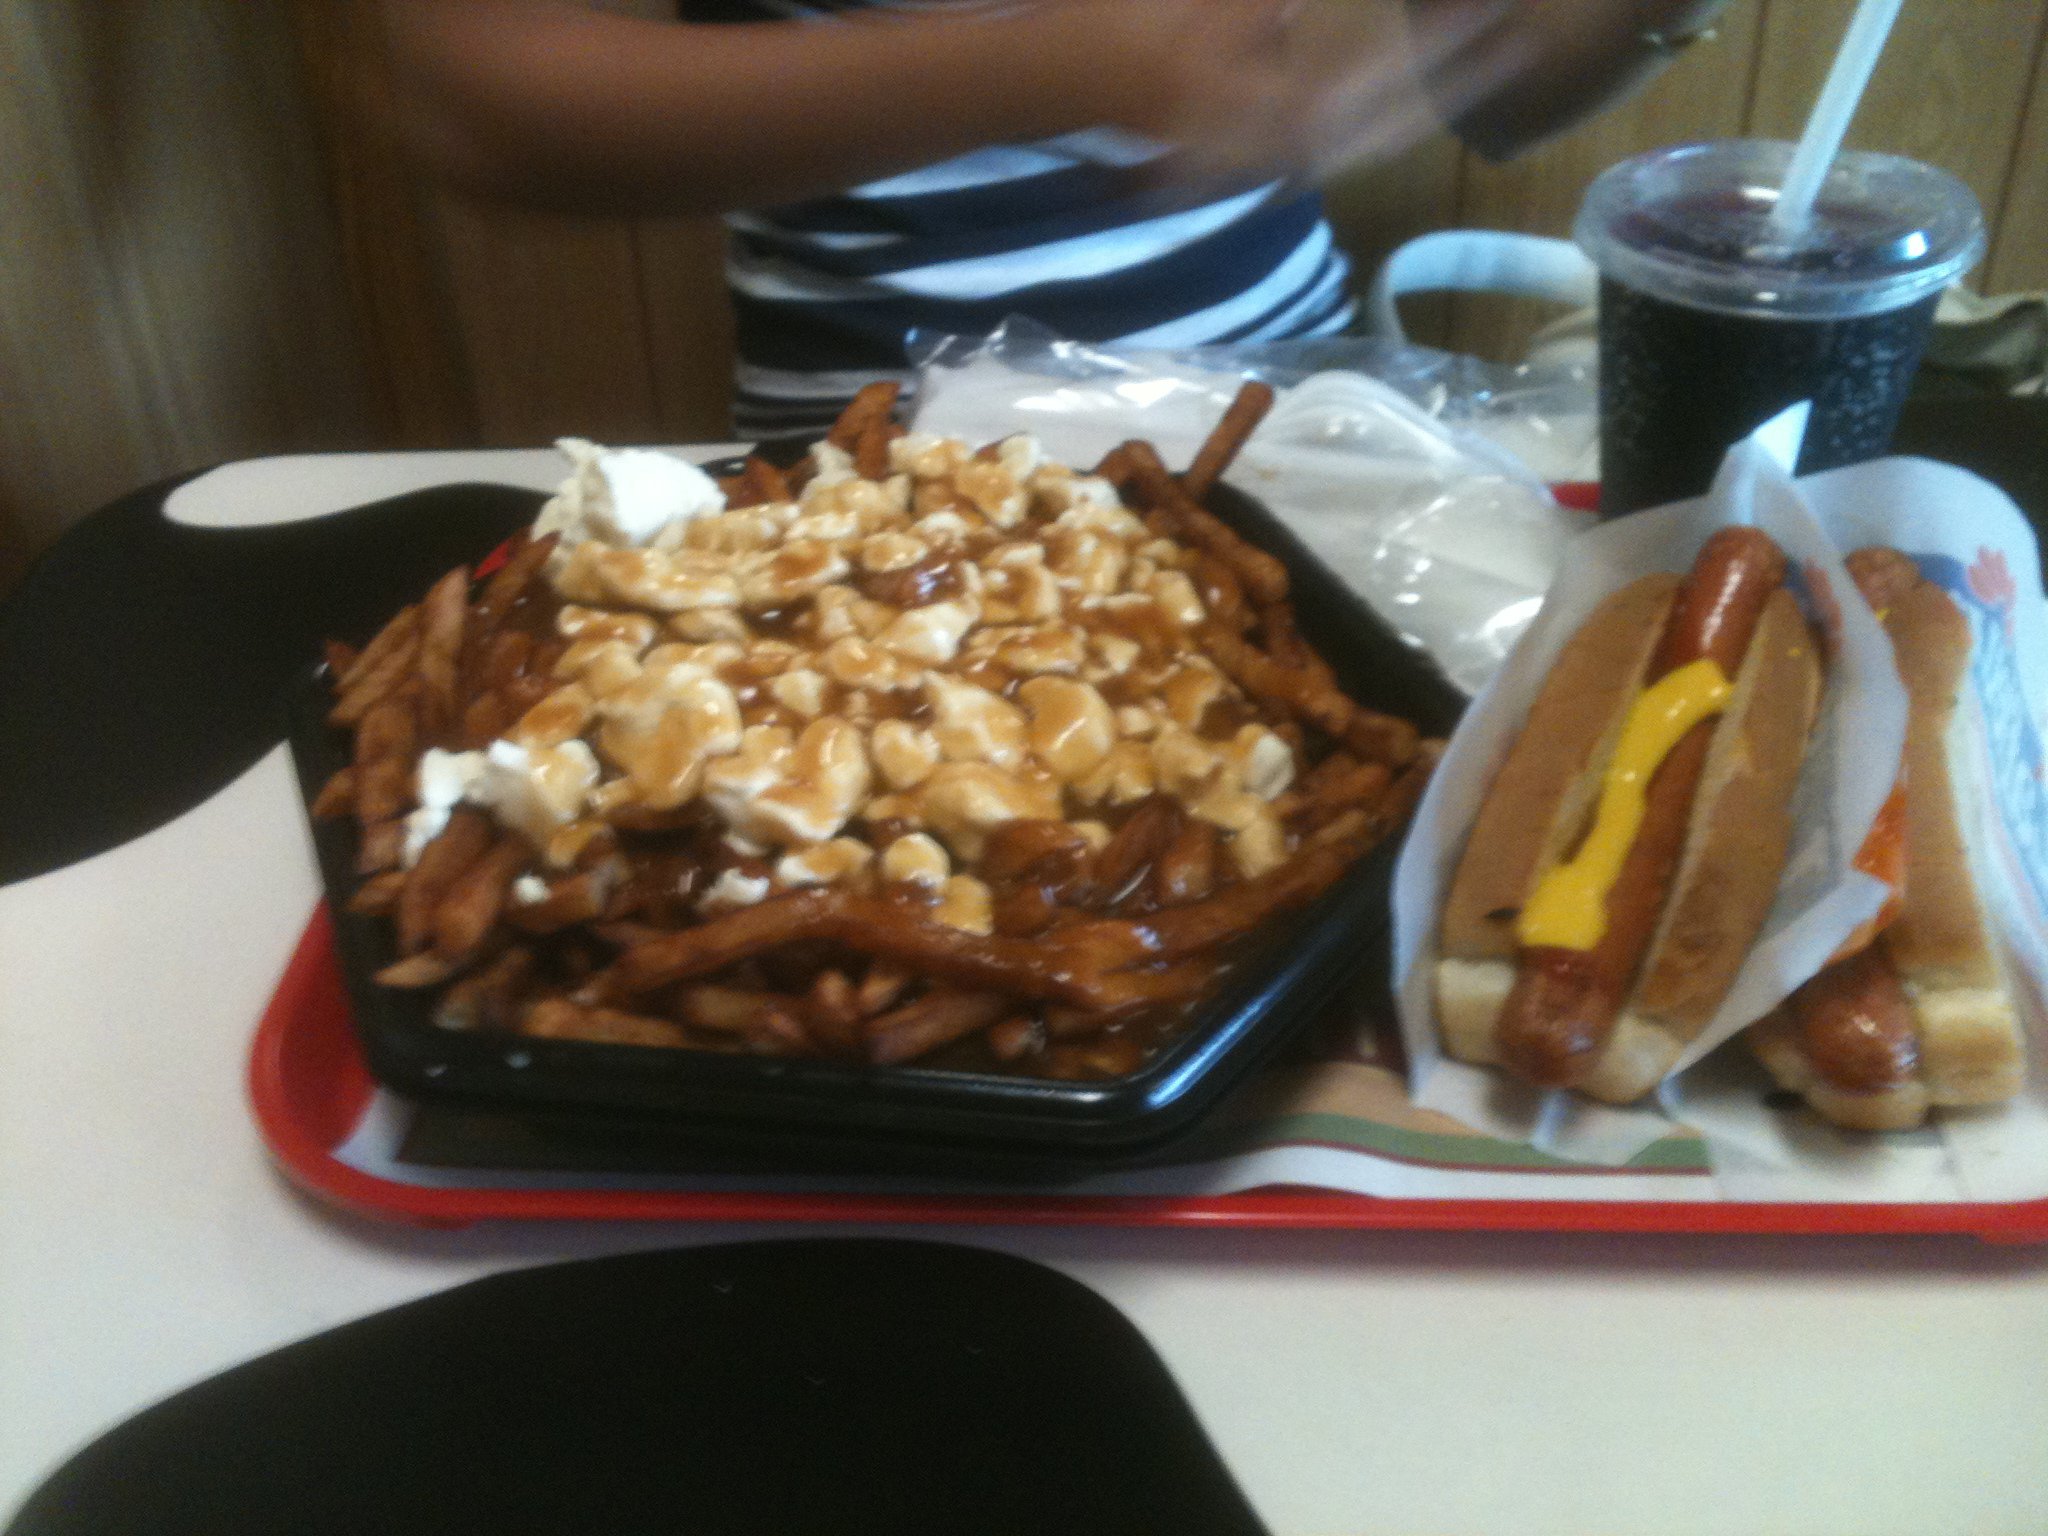 This is one of the best Poutine in Quebec from Fromagerie Lemaire